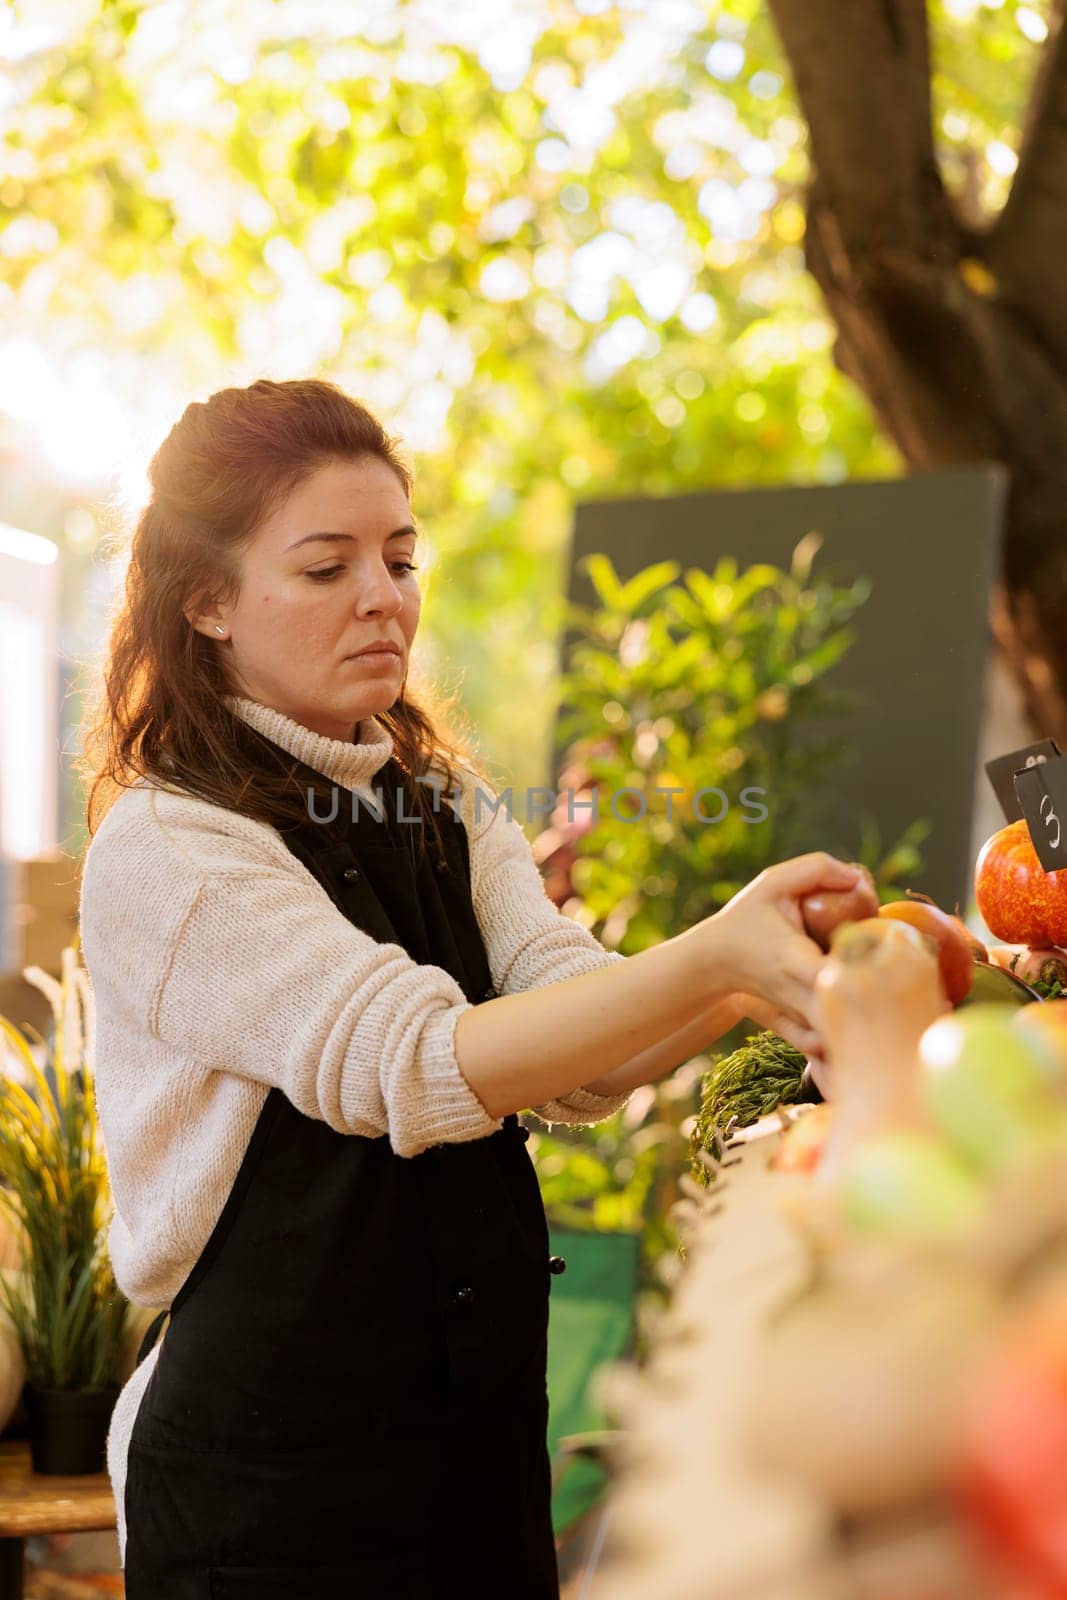 Woman arranging fresh produce on booth by DCStudio